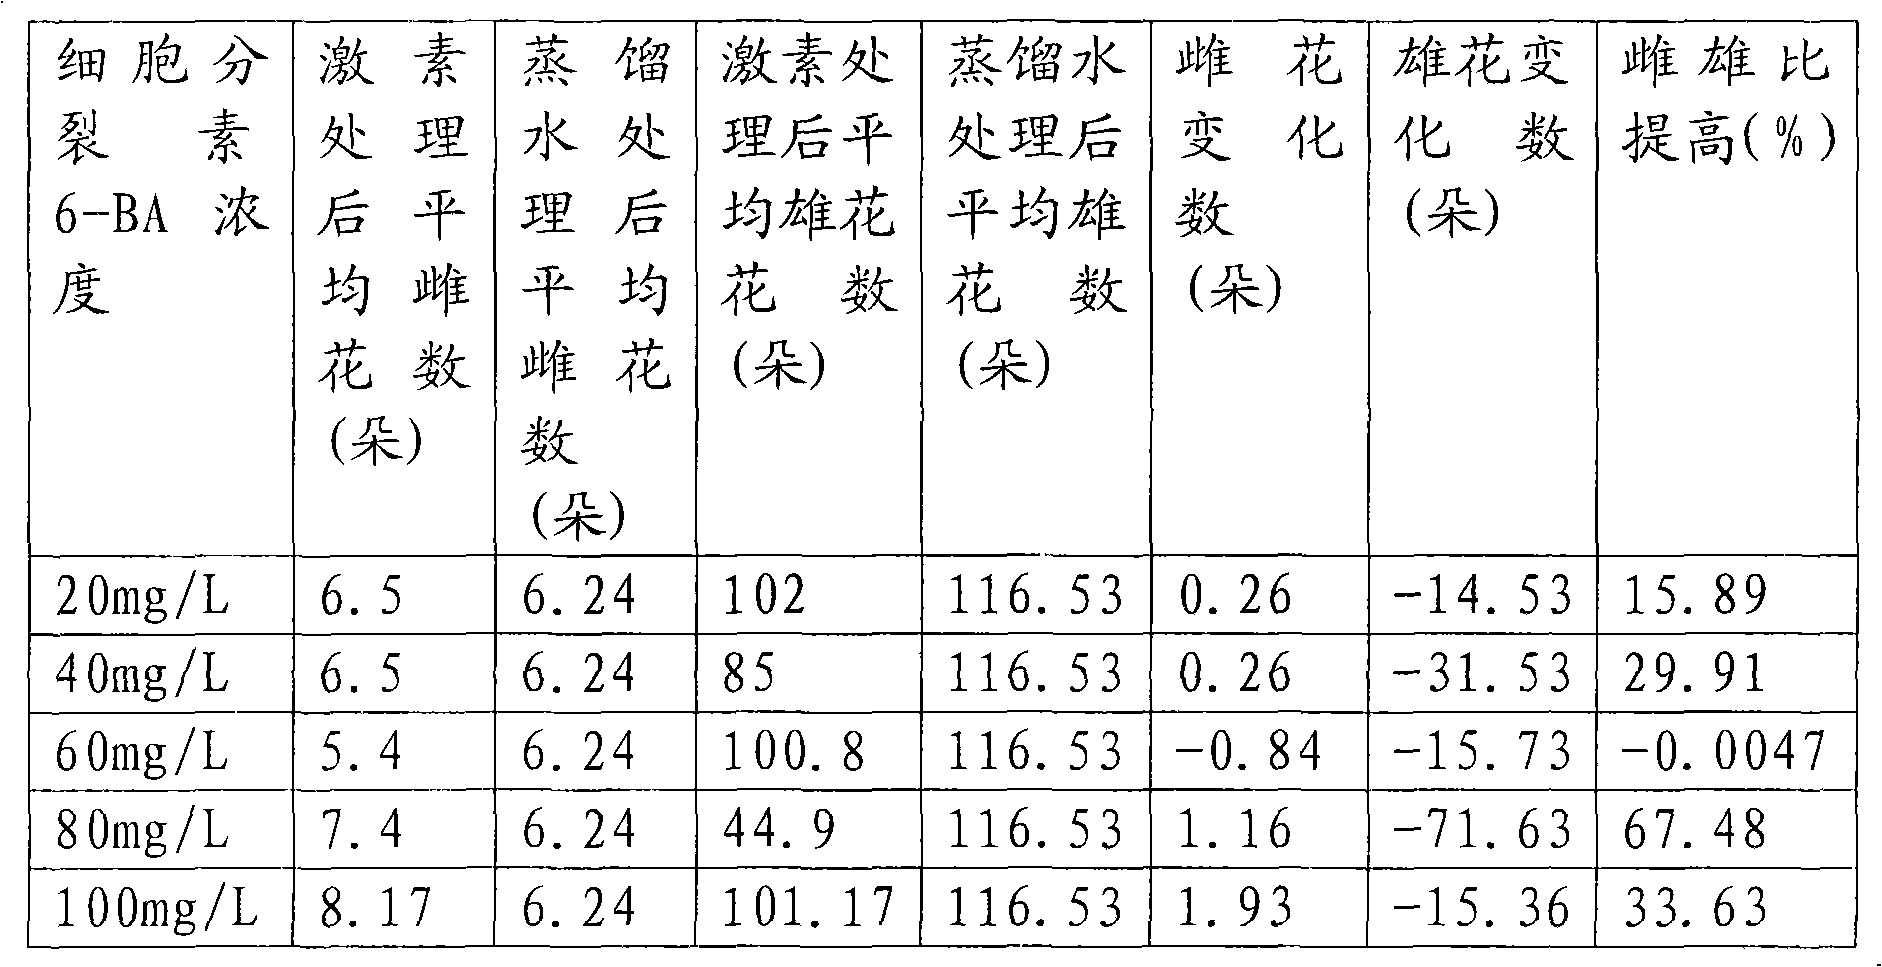 Application of cytokinin 6-BA in changing sex ratio of plant flowers